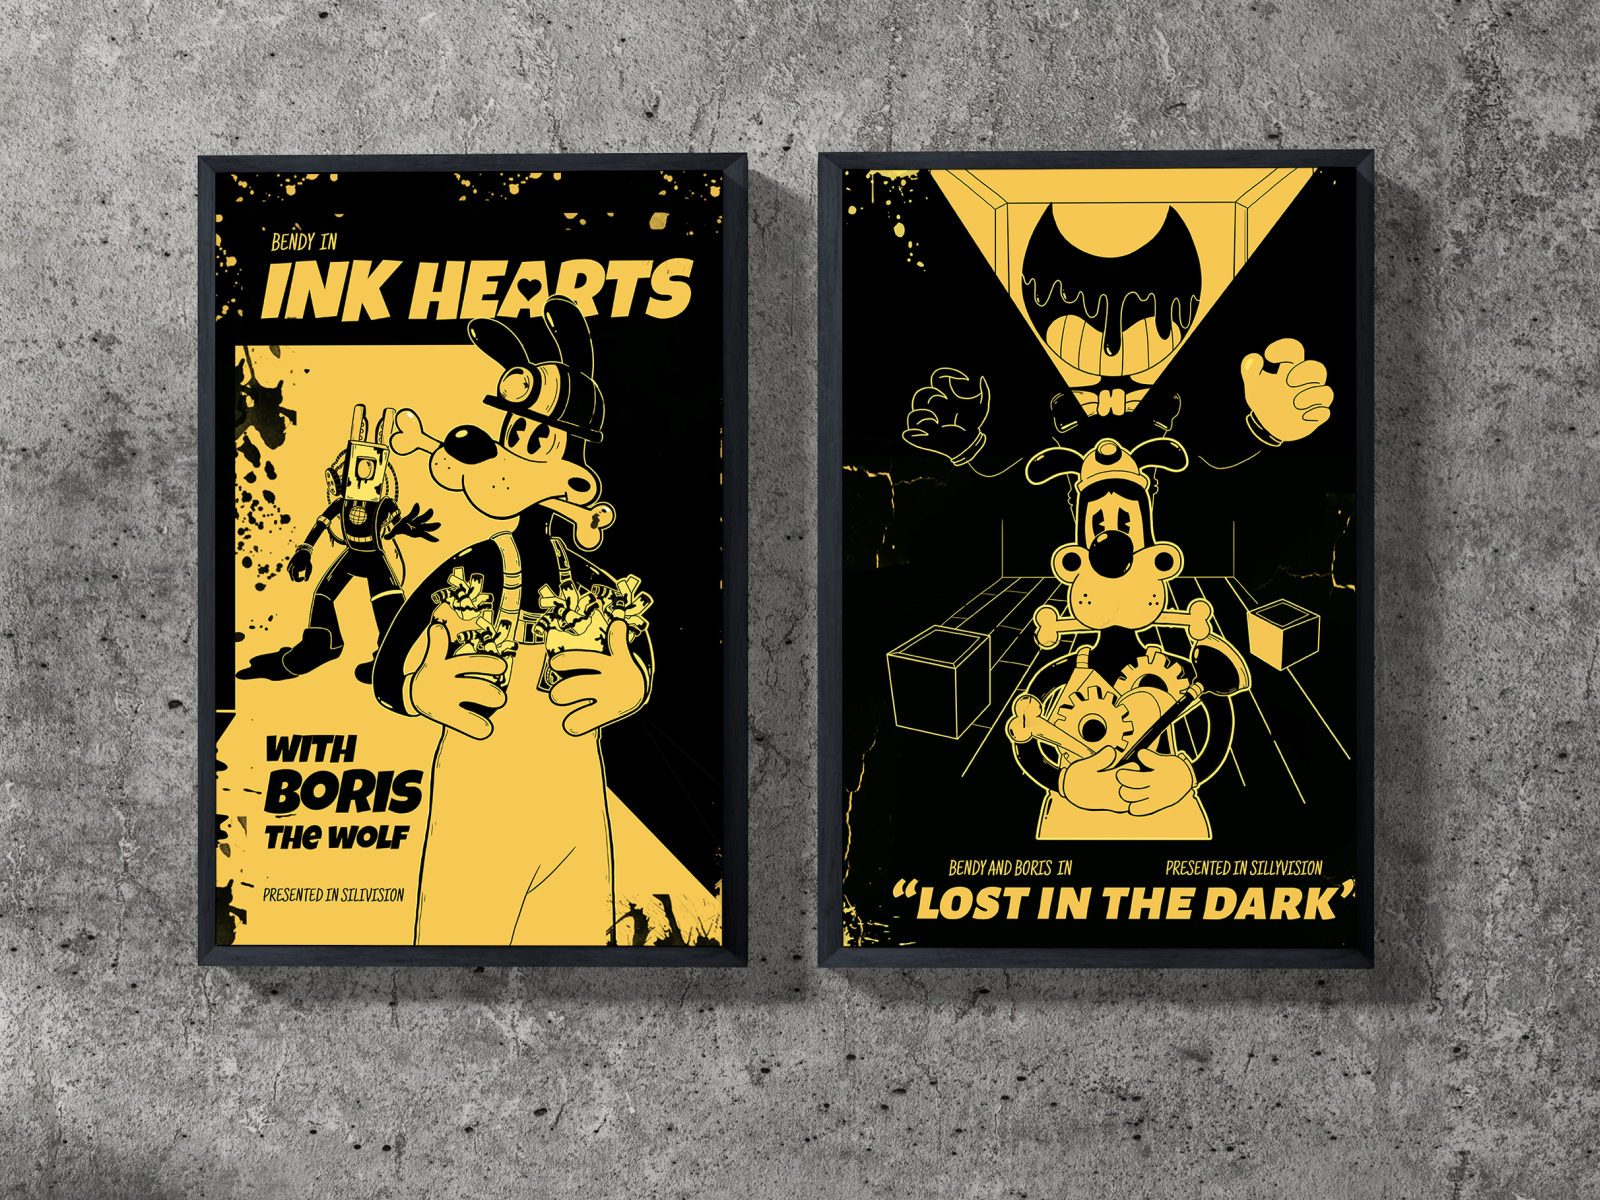 Posters for contest "Boris and the Dark Survival" art board illustration art illustration design graphic illustration digital art digital drawing illustration digital poster design design design a day graphic artist cartoon character illustration graphic design poster art posters